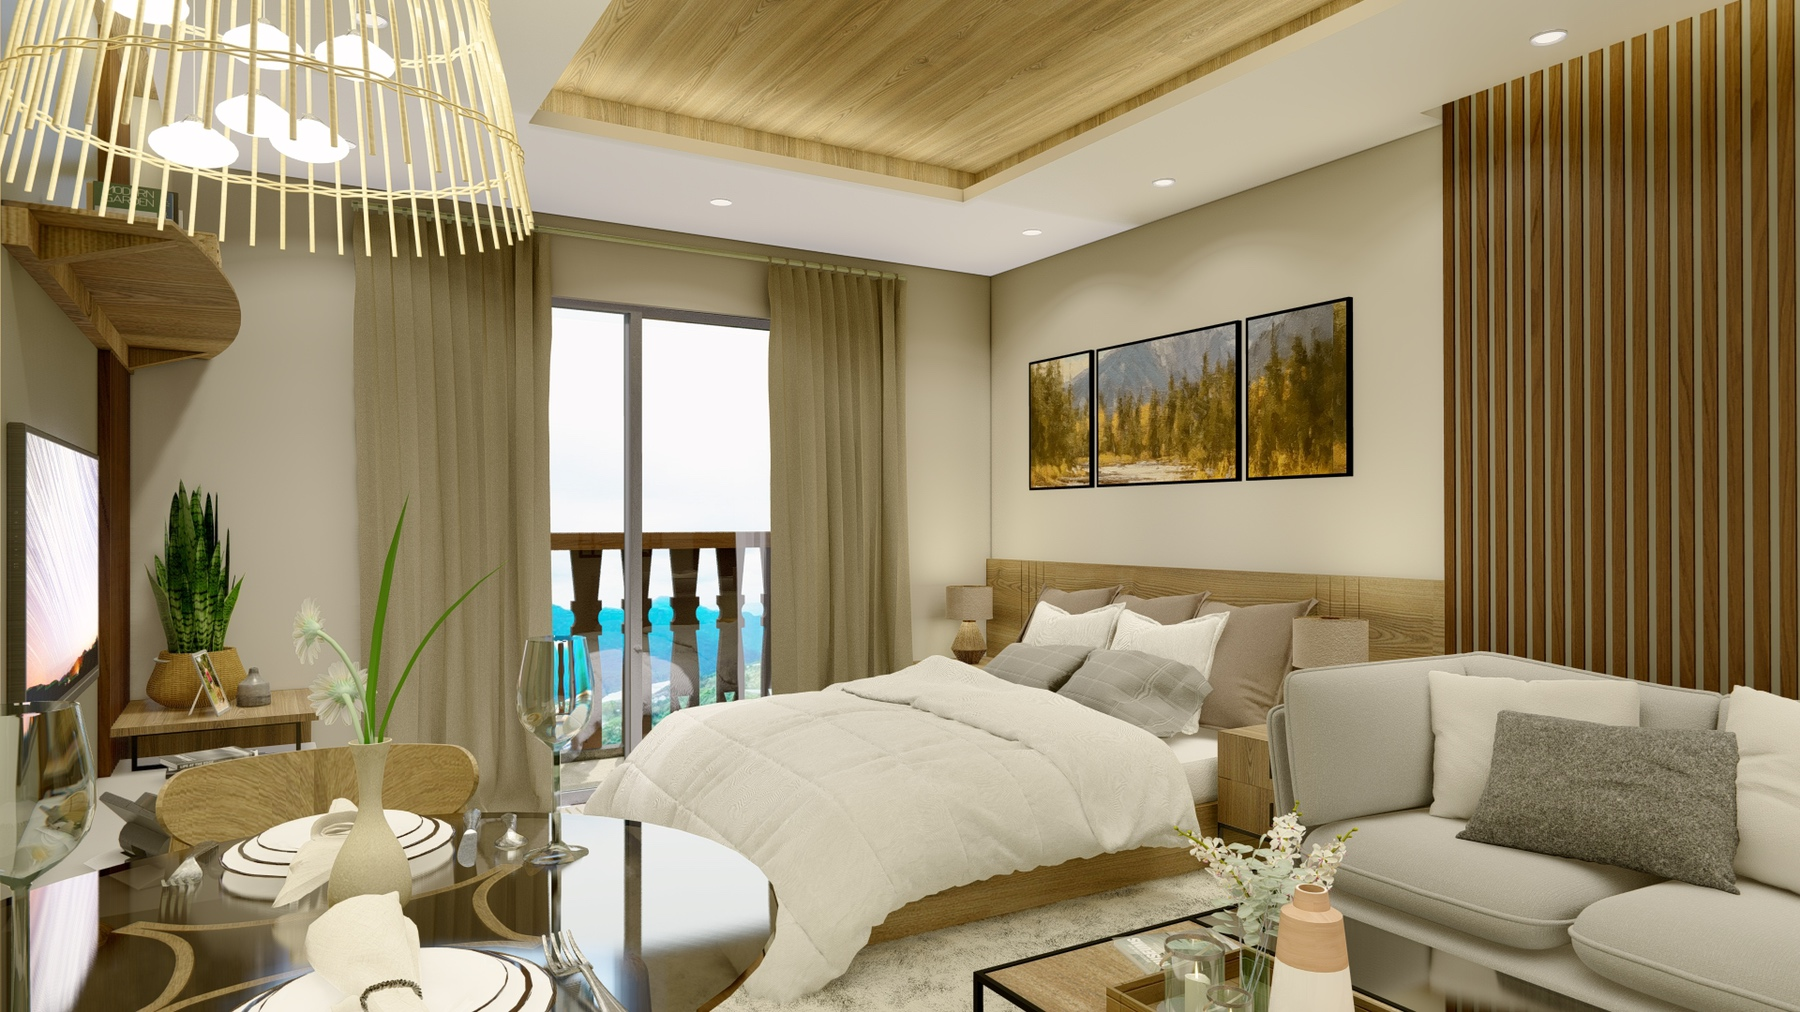 02 - In Alpine Villas, staying connected to nature is easier than ever. All condo units offer balconies that provide a stunning view of the pine forest